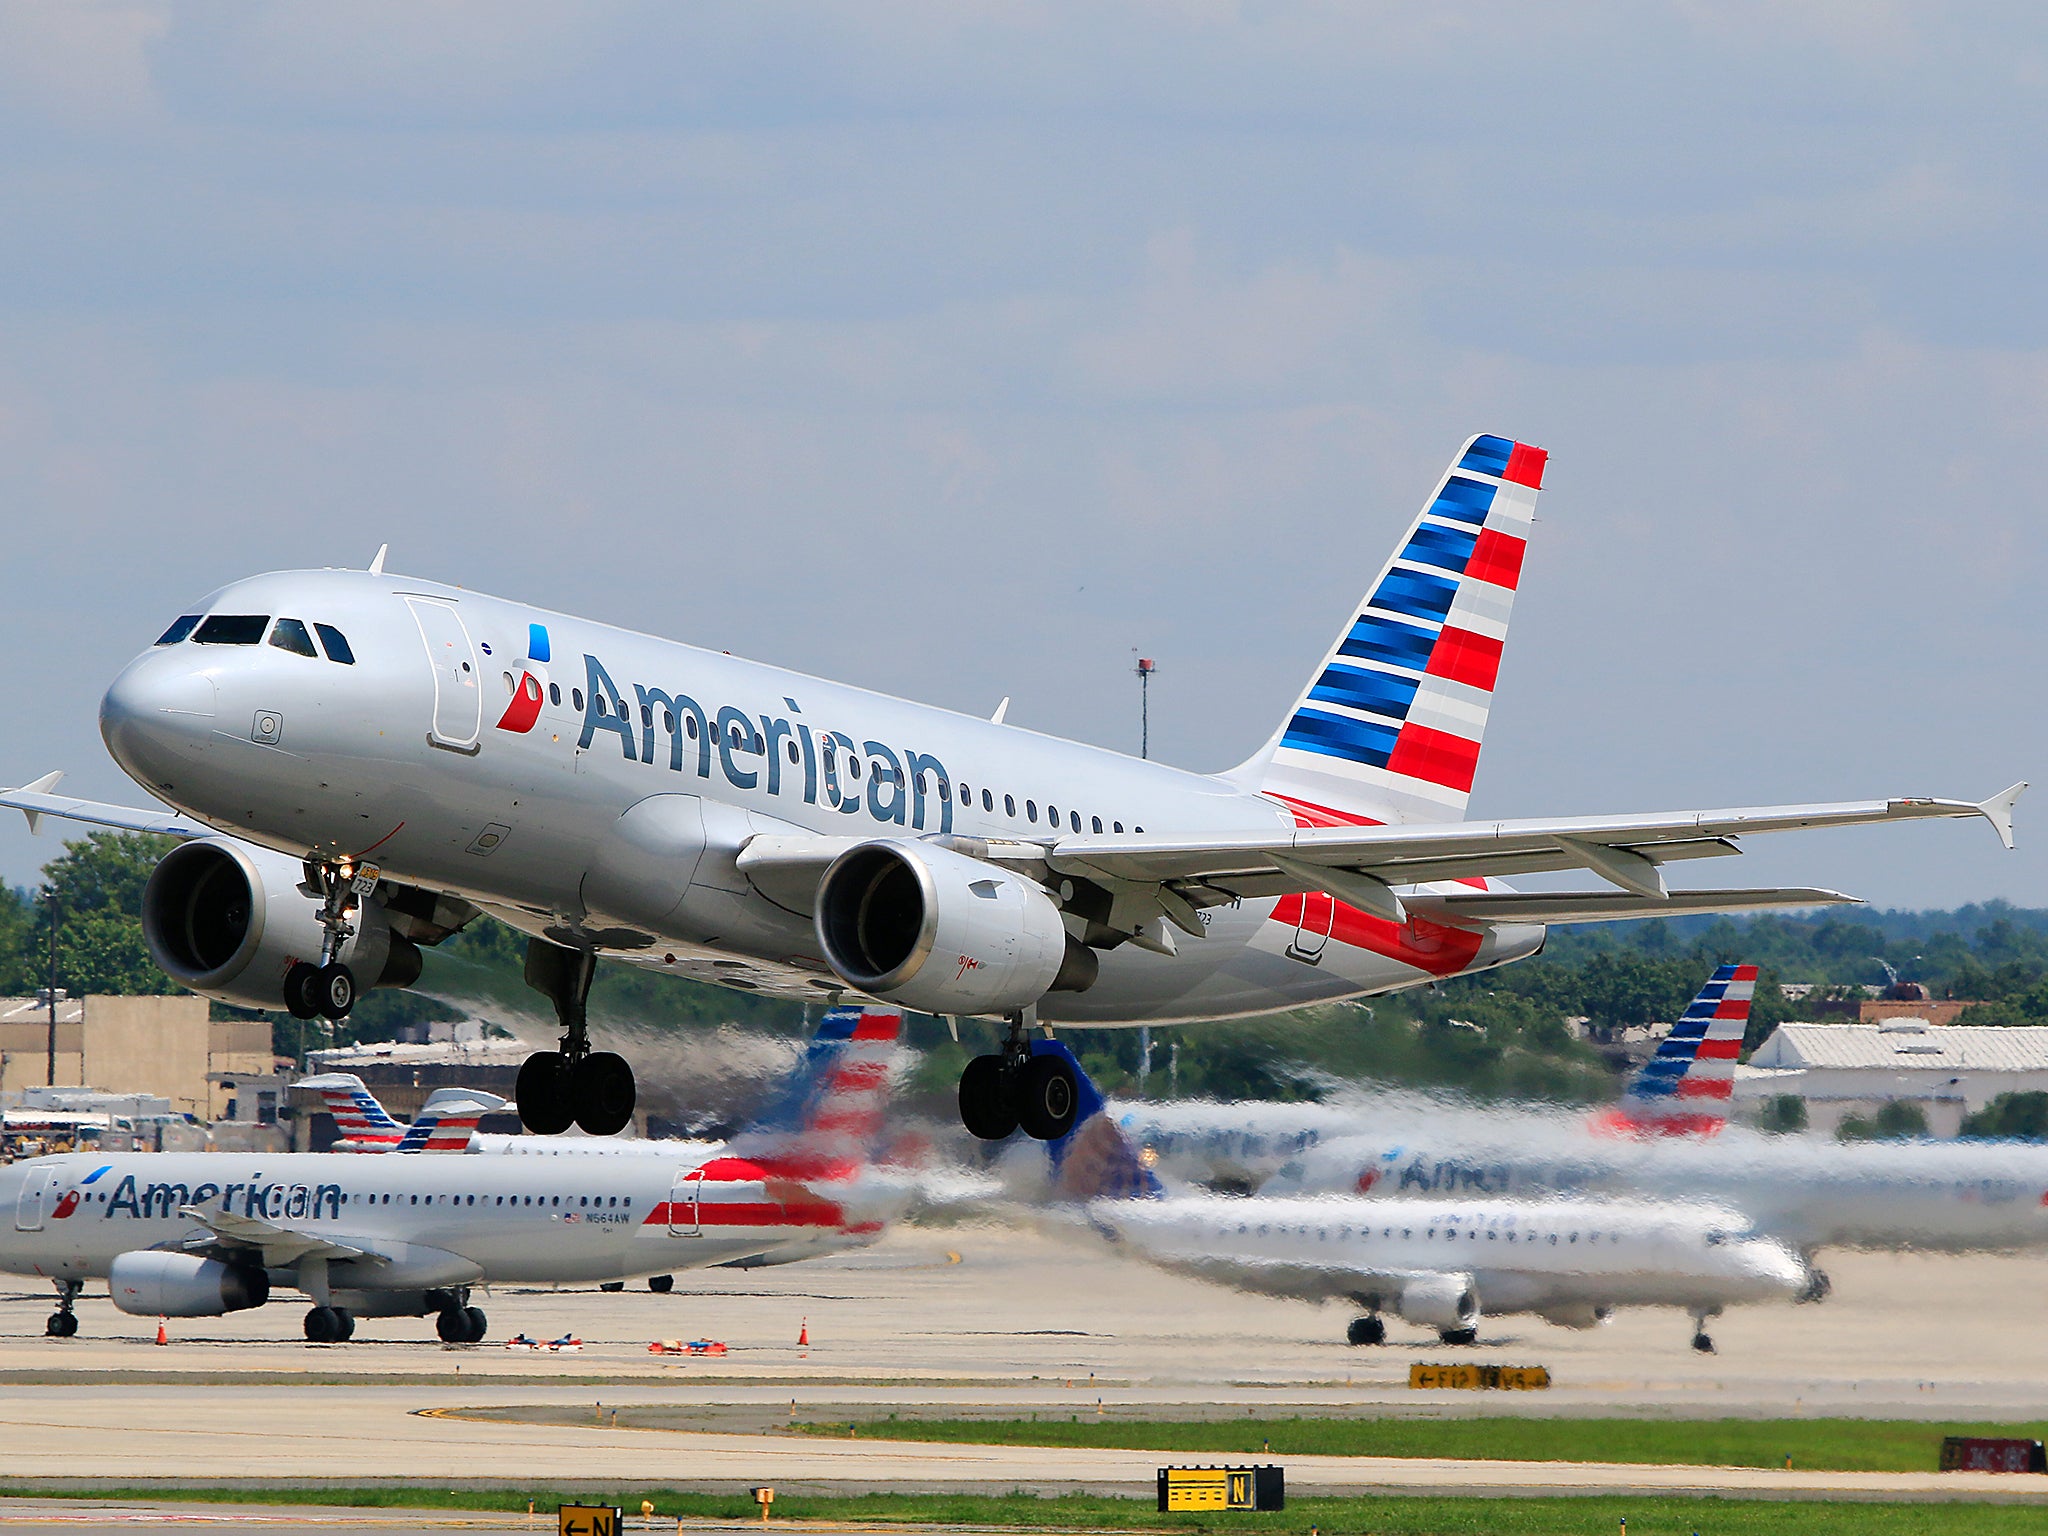 American Airlines flight attendants accused of being "racist"